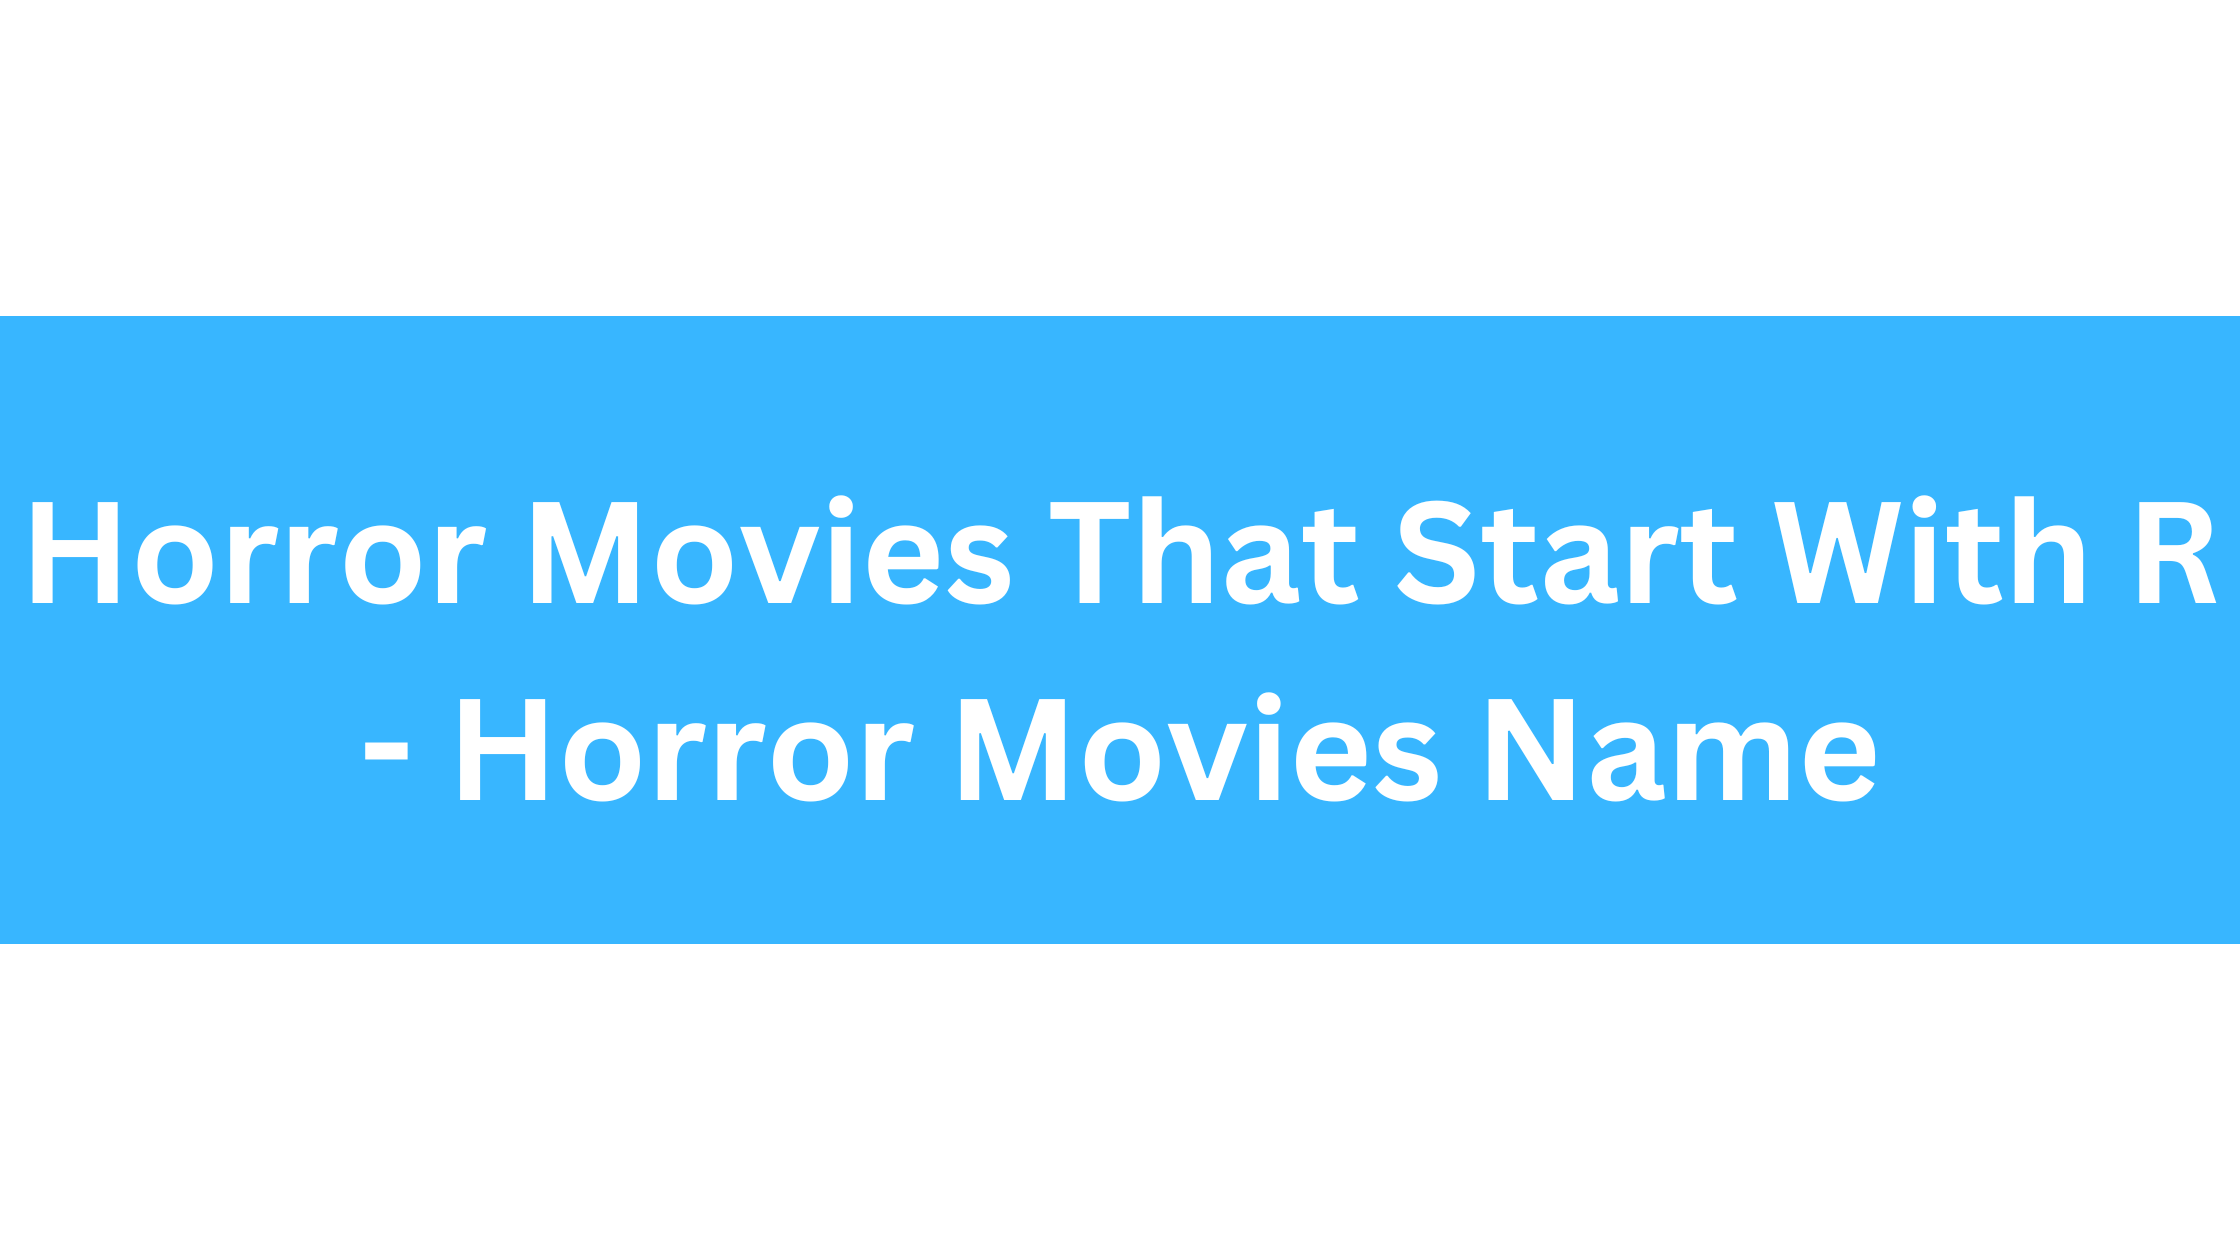 Horror Movies That Start With R